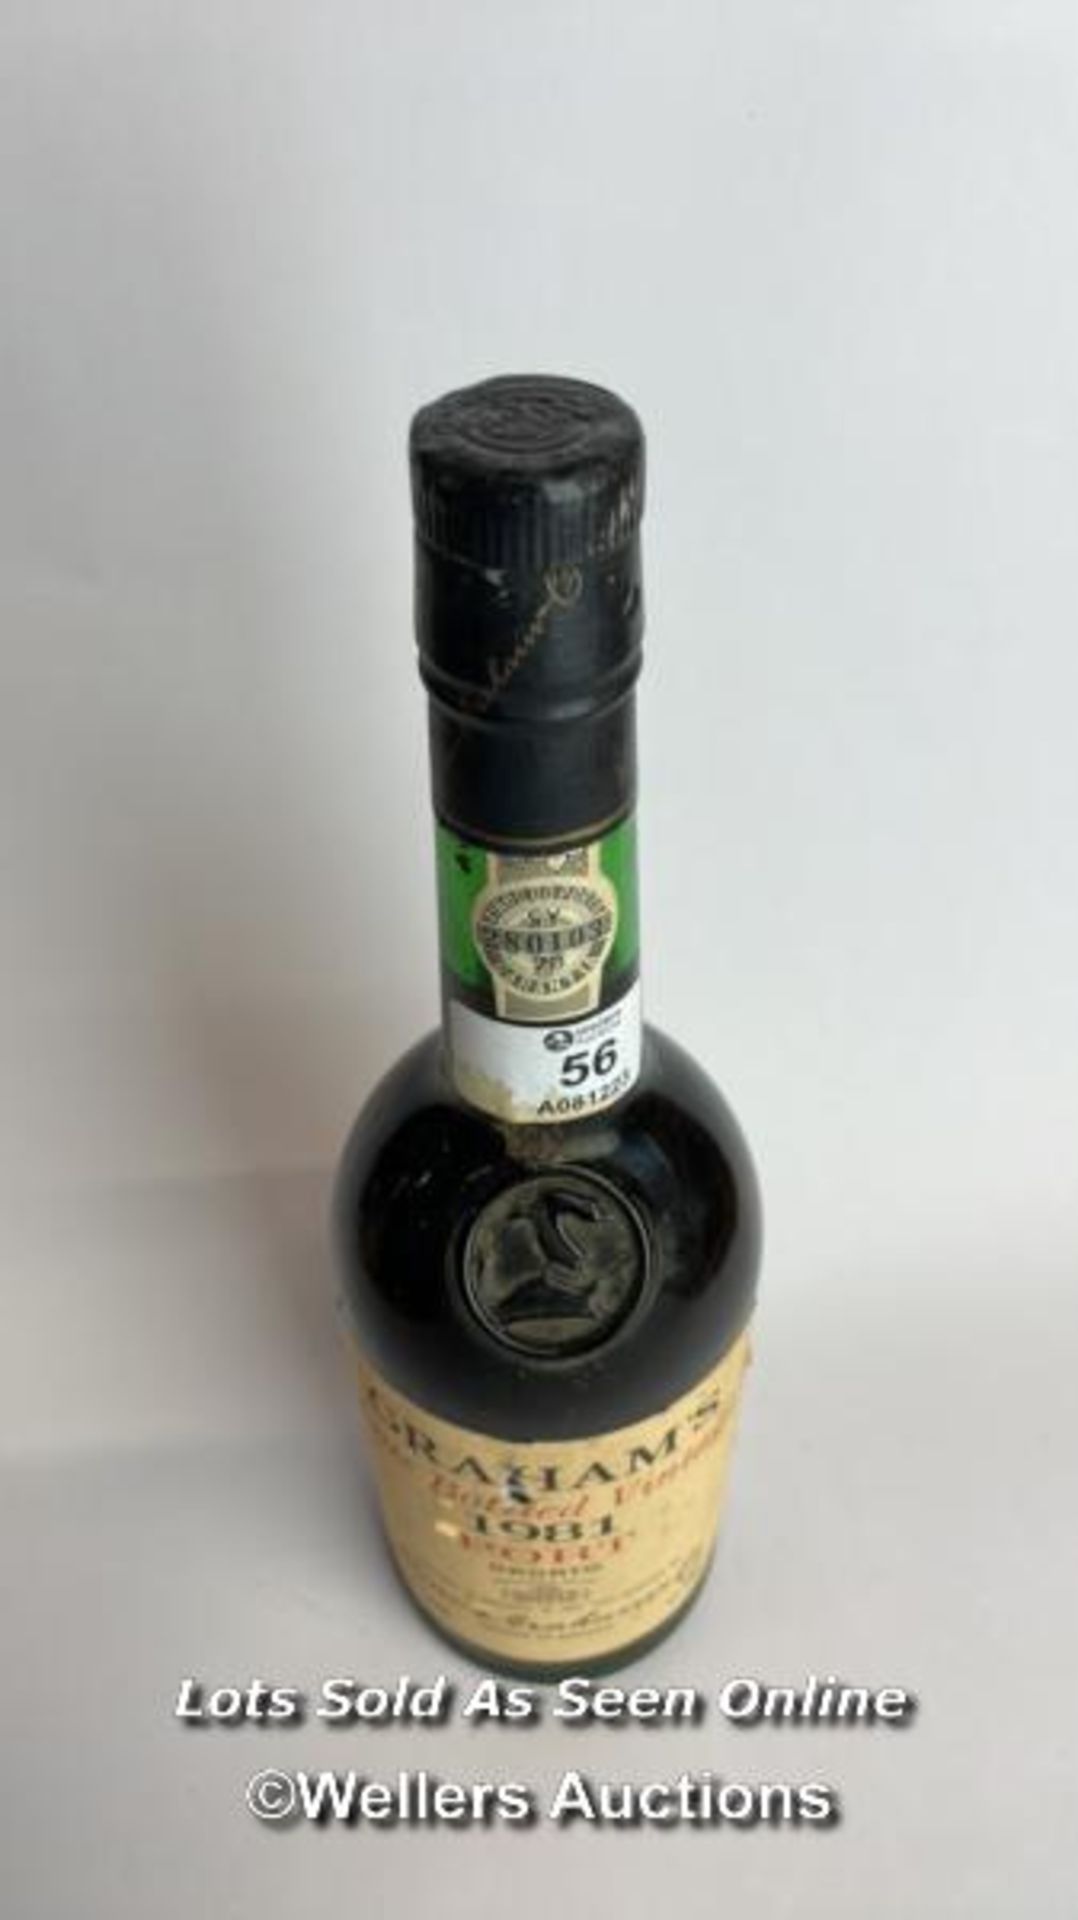 Graham's Late bottled vintage 1981 port, 70cl, 20% vol / Please see images for fill level and - Image 5 of 7